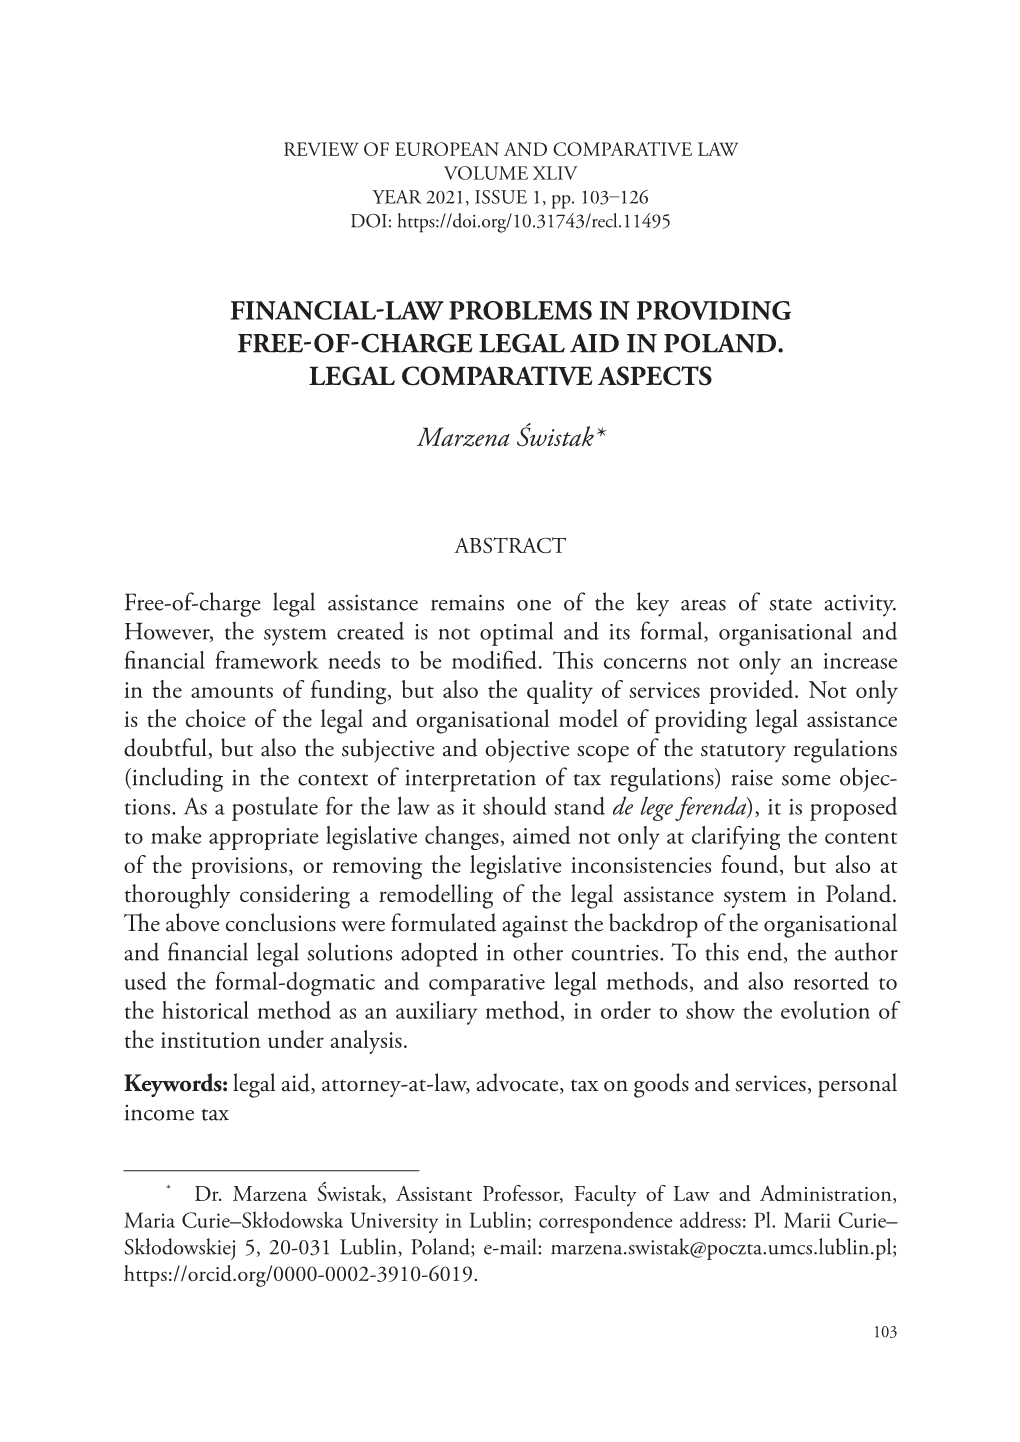 Financial-Law Problems in Providing Free-Of-Charge Legal Aid in Poland